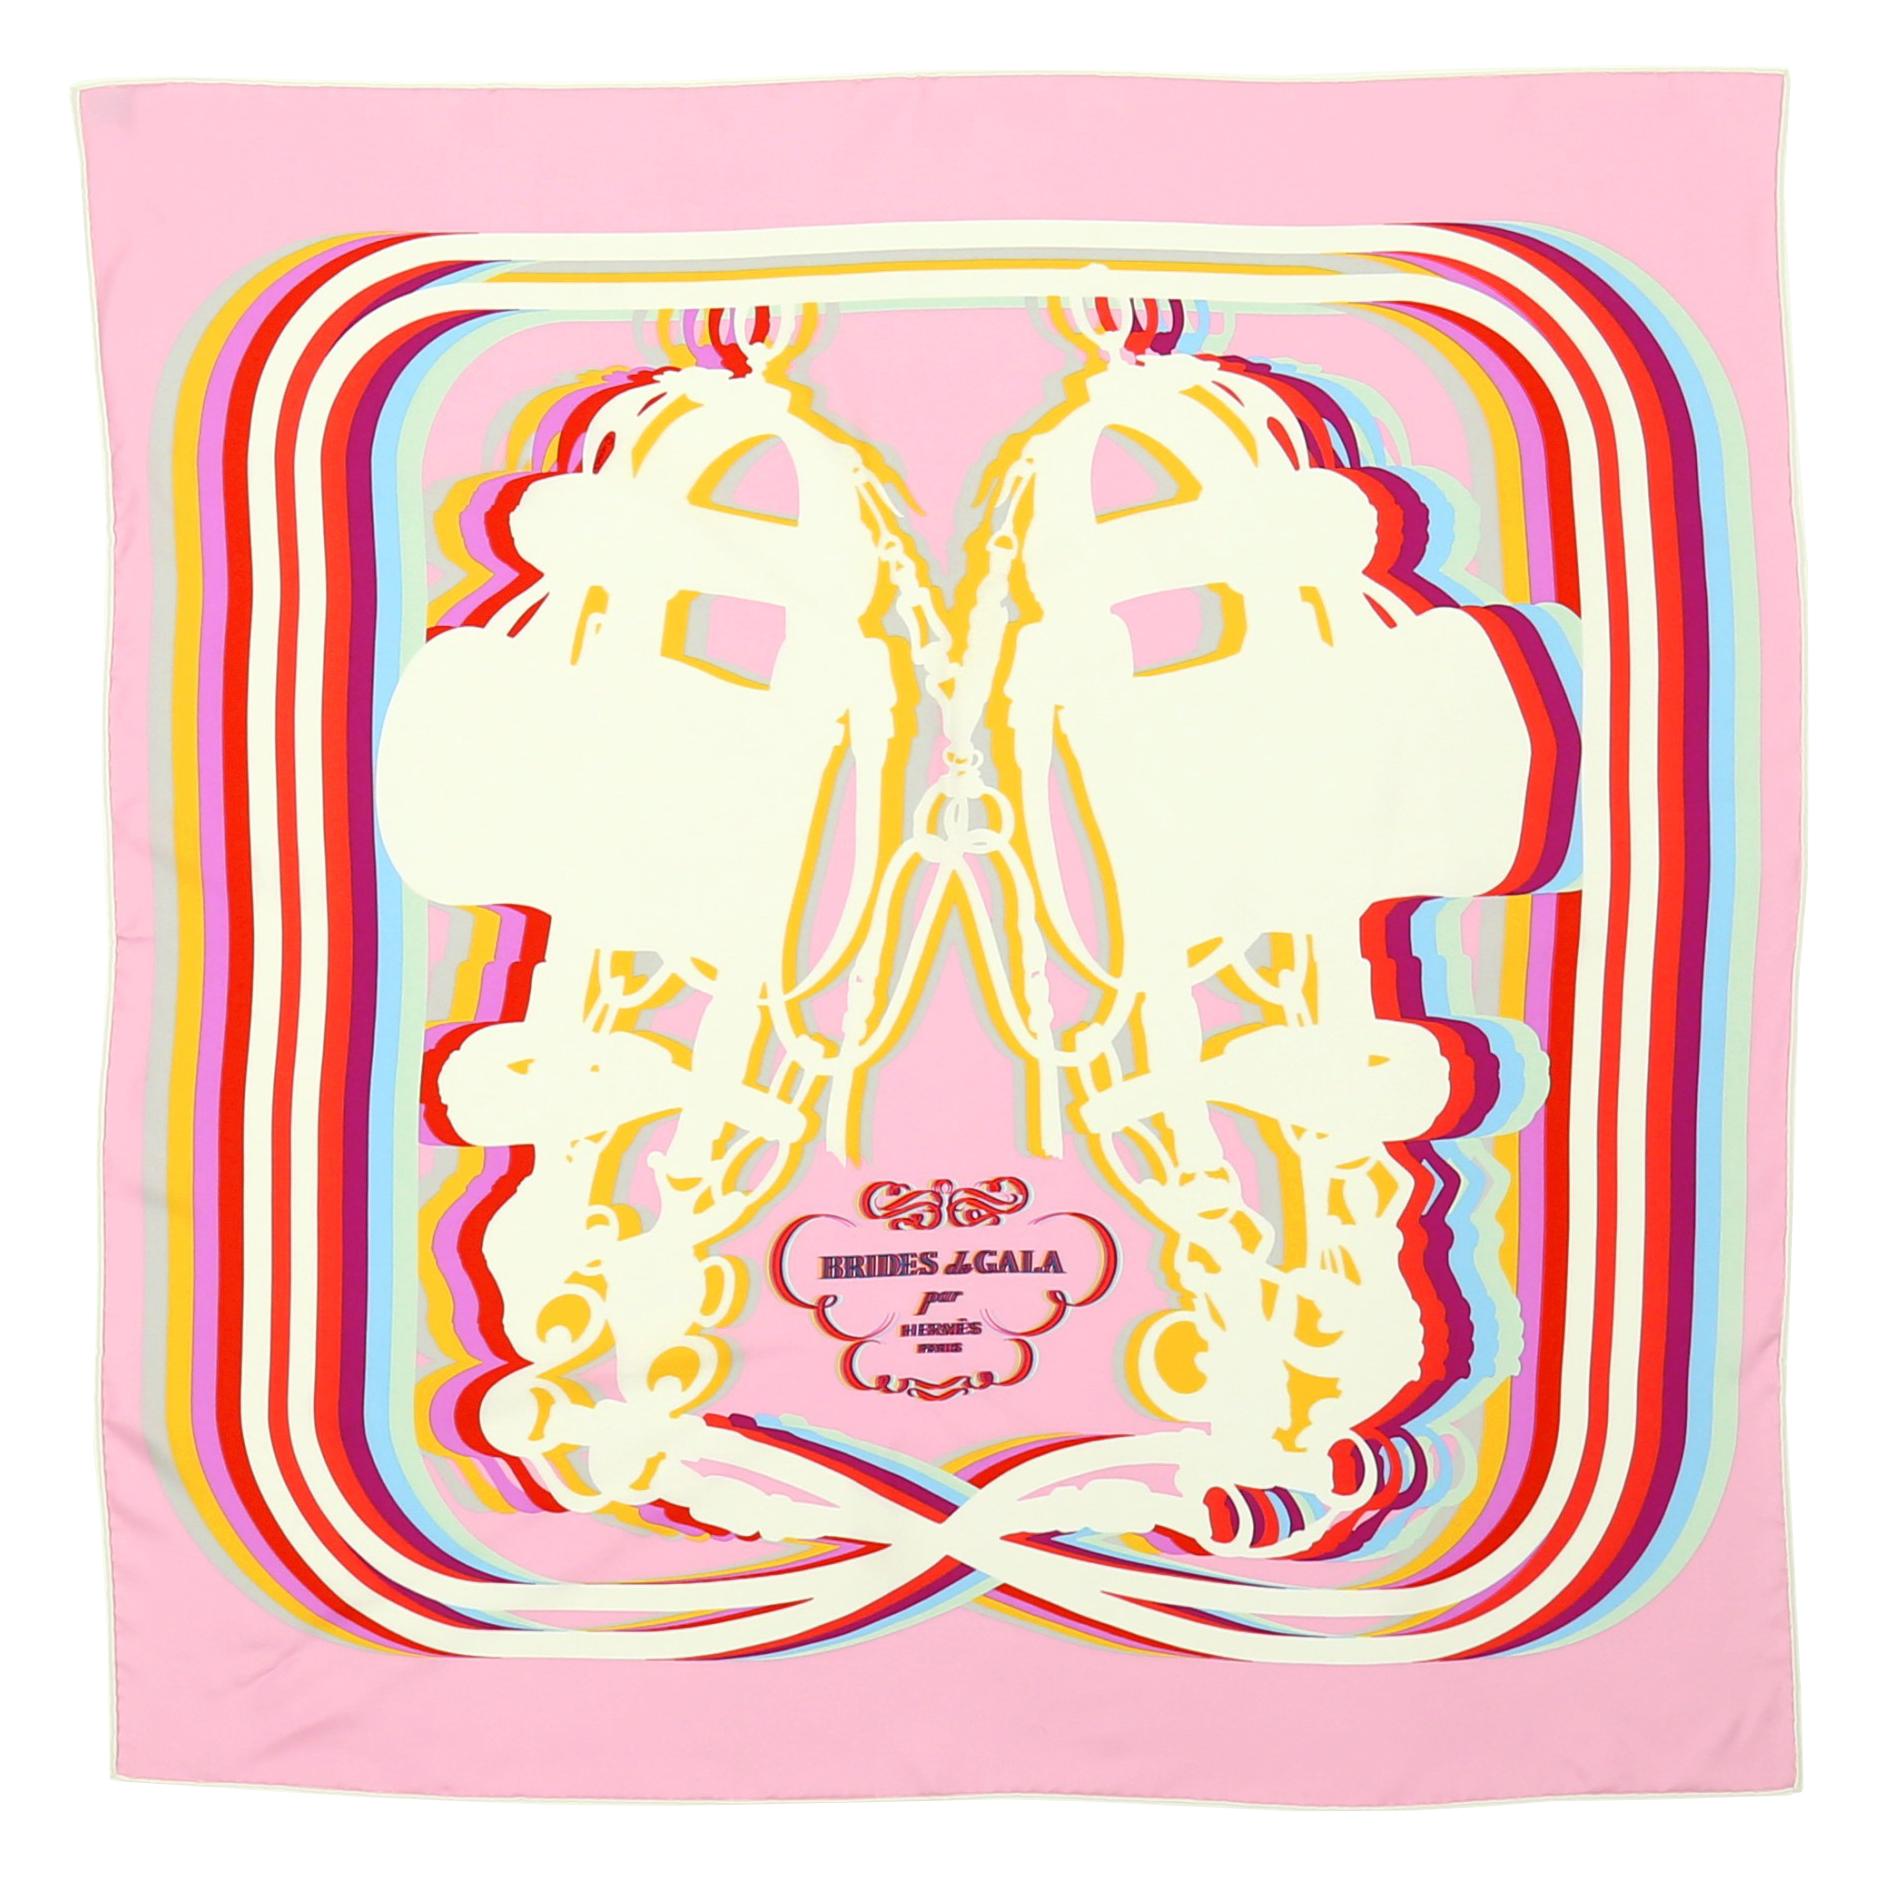 History of the Hermès Carré Scarf - How is the Hermès Silk Scarf Made?